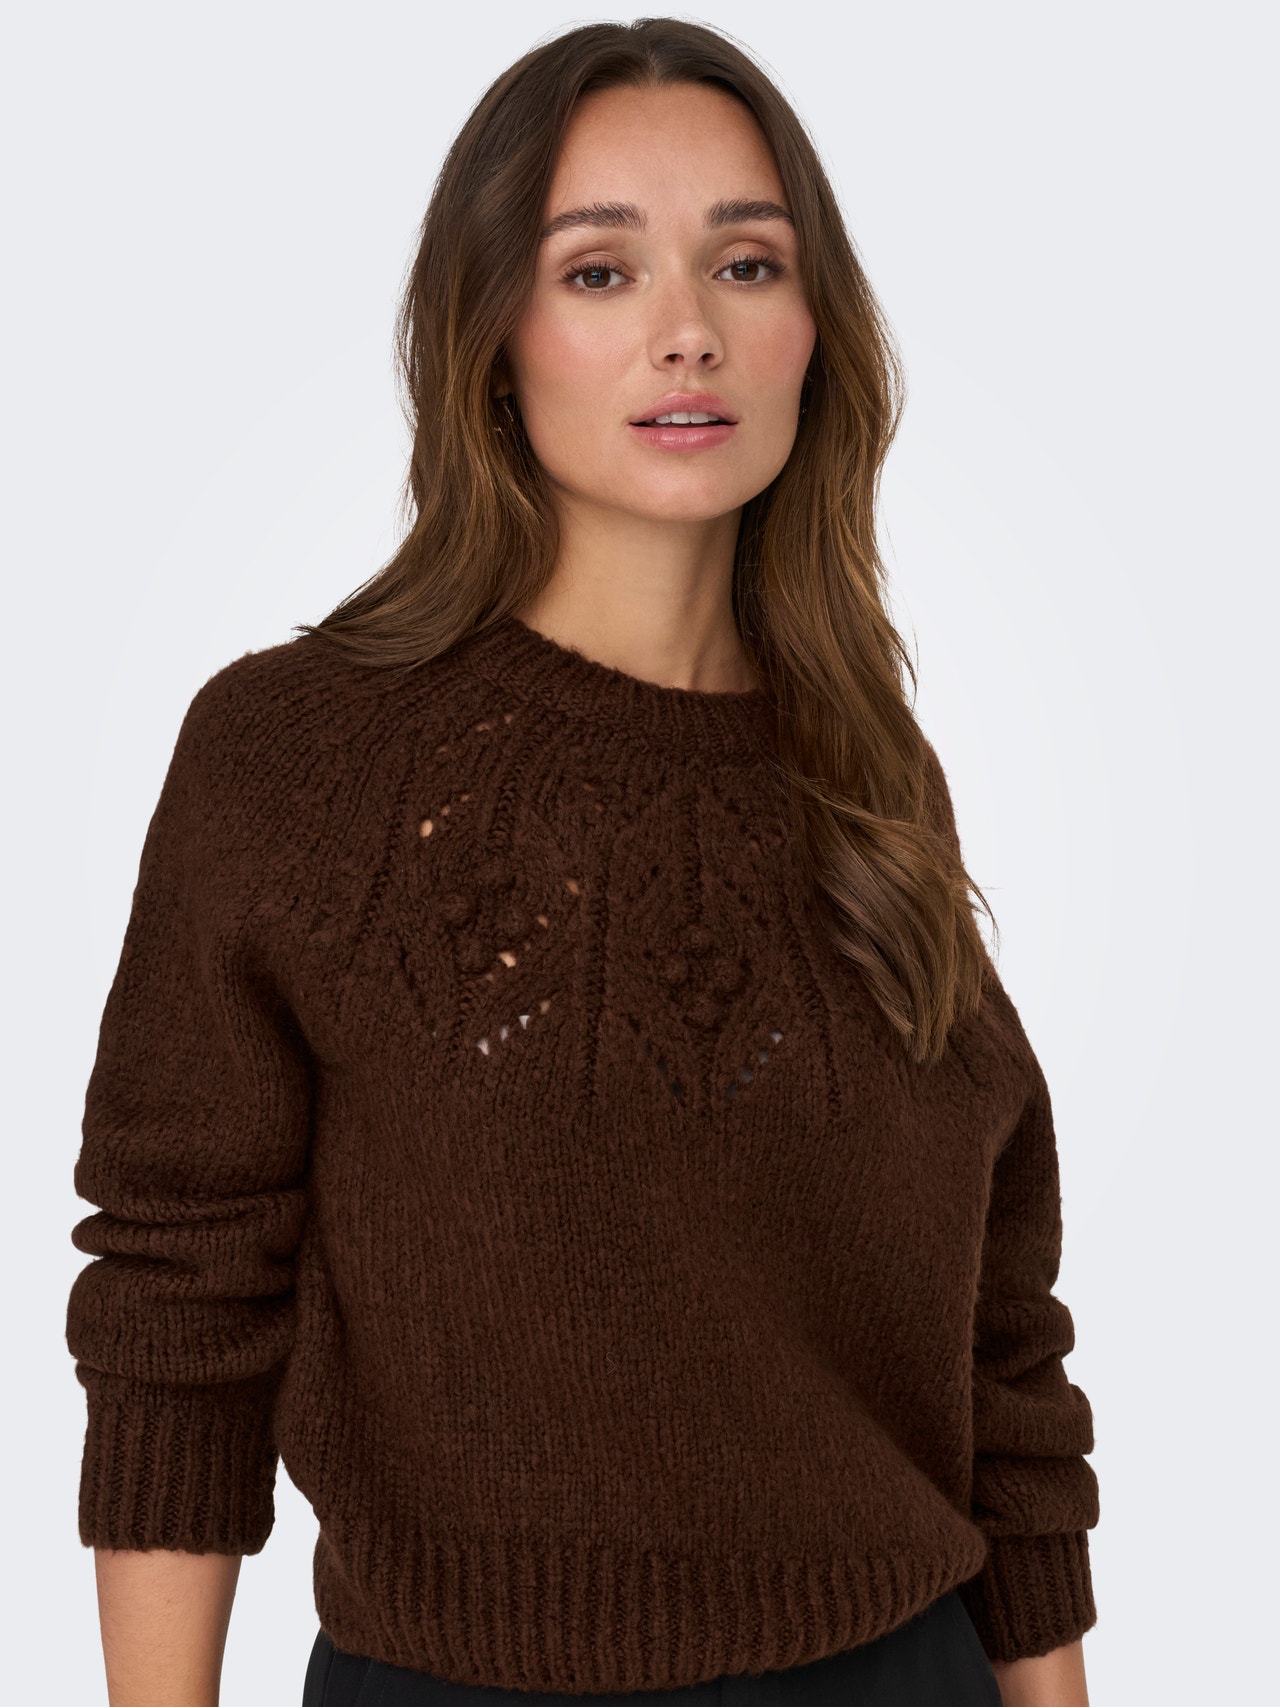 ONLY O-neck knitted pullover -Fondue Fudge - 15302361